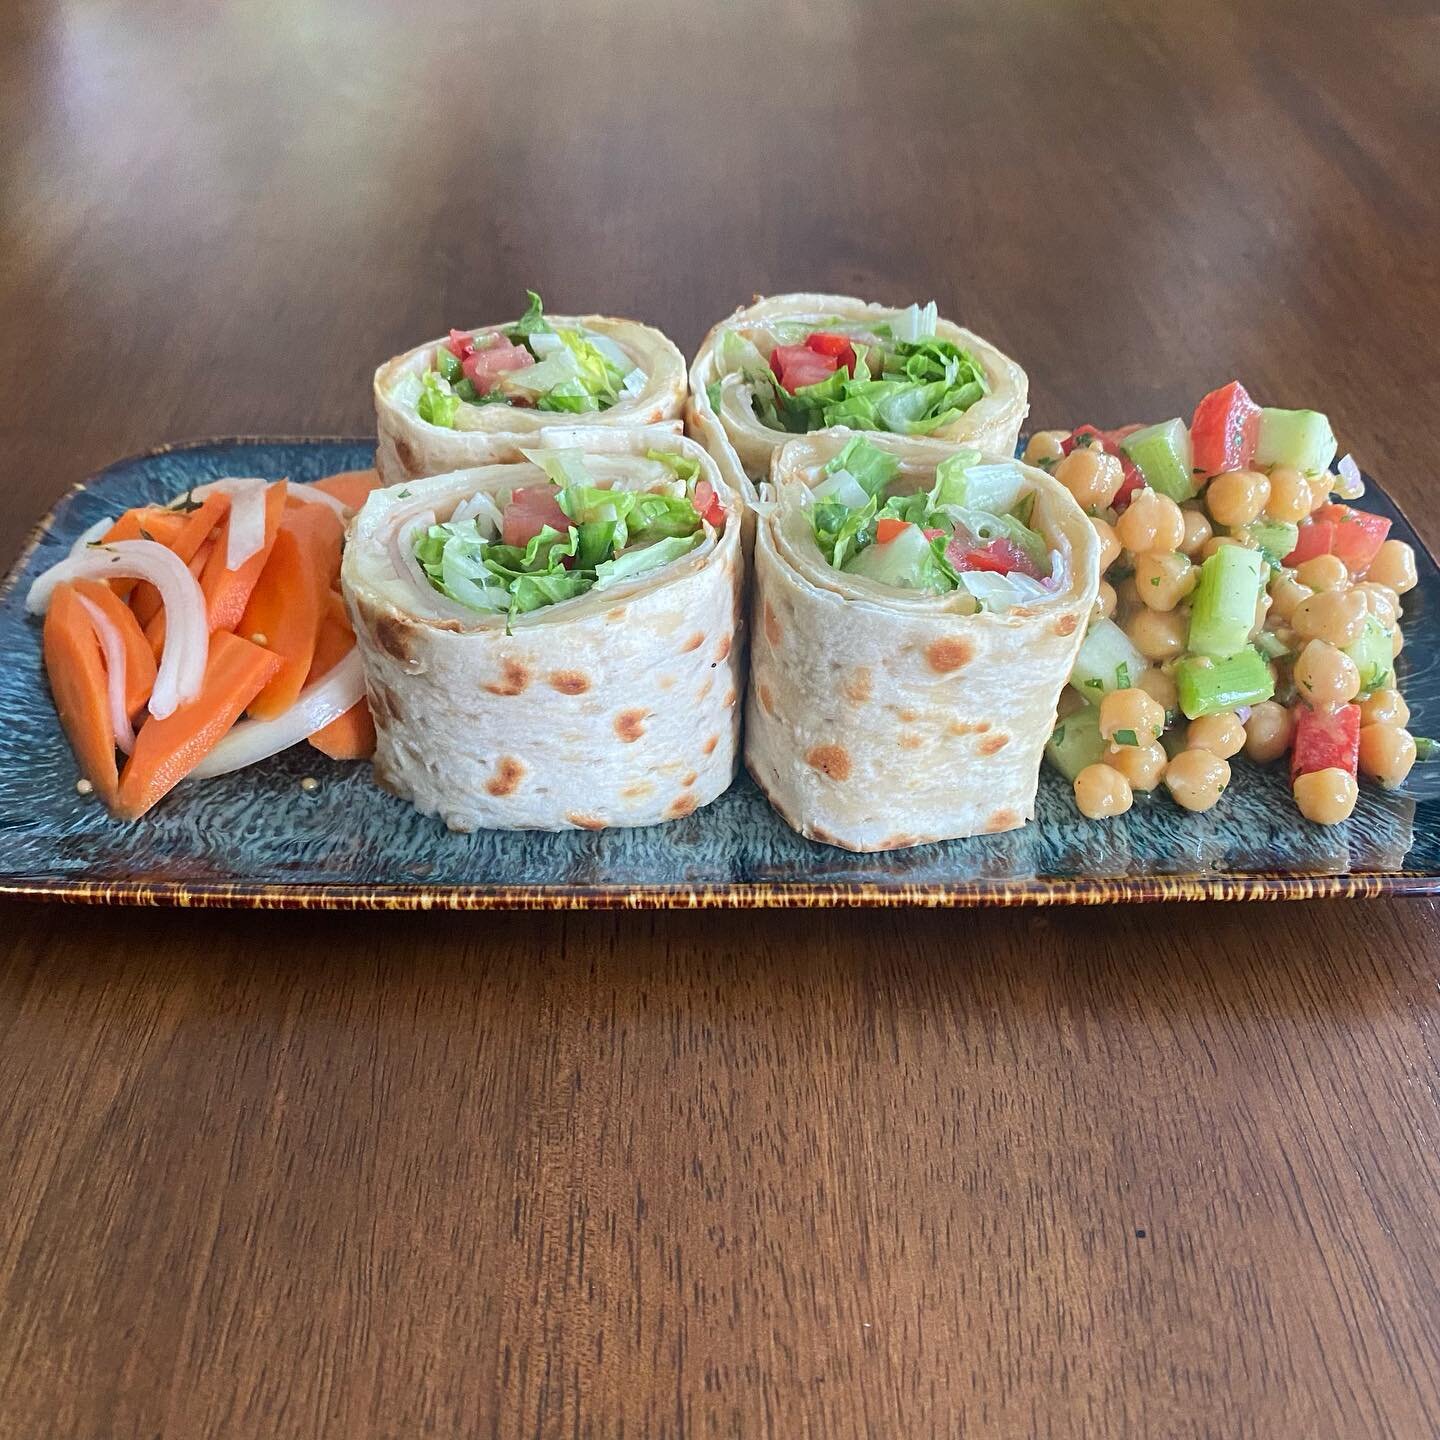 Get wrapped up in this goodness 😋 #turkeywrap